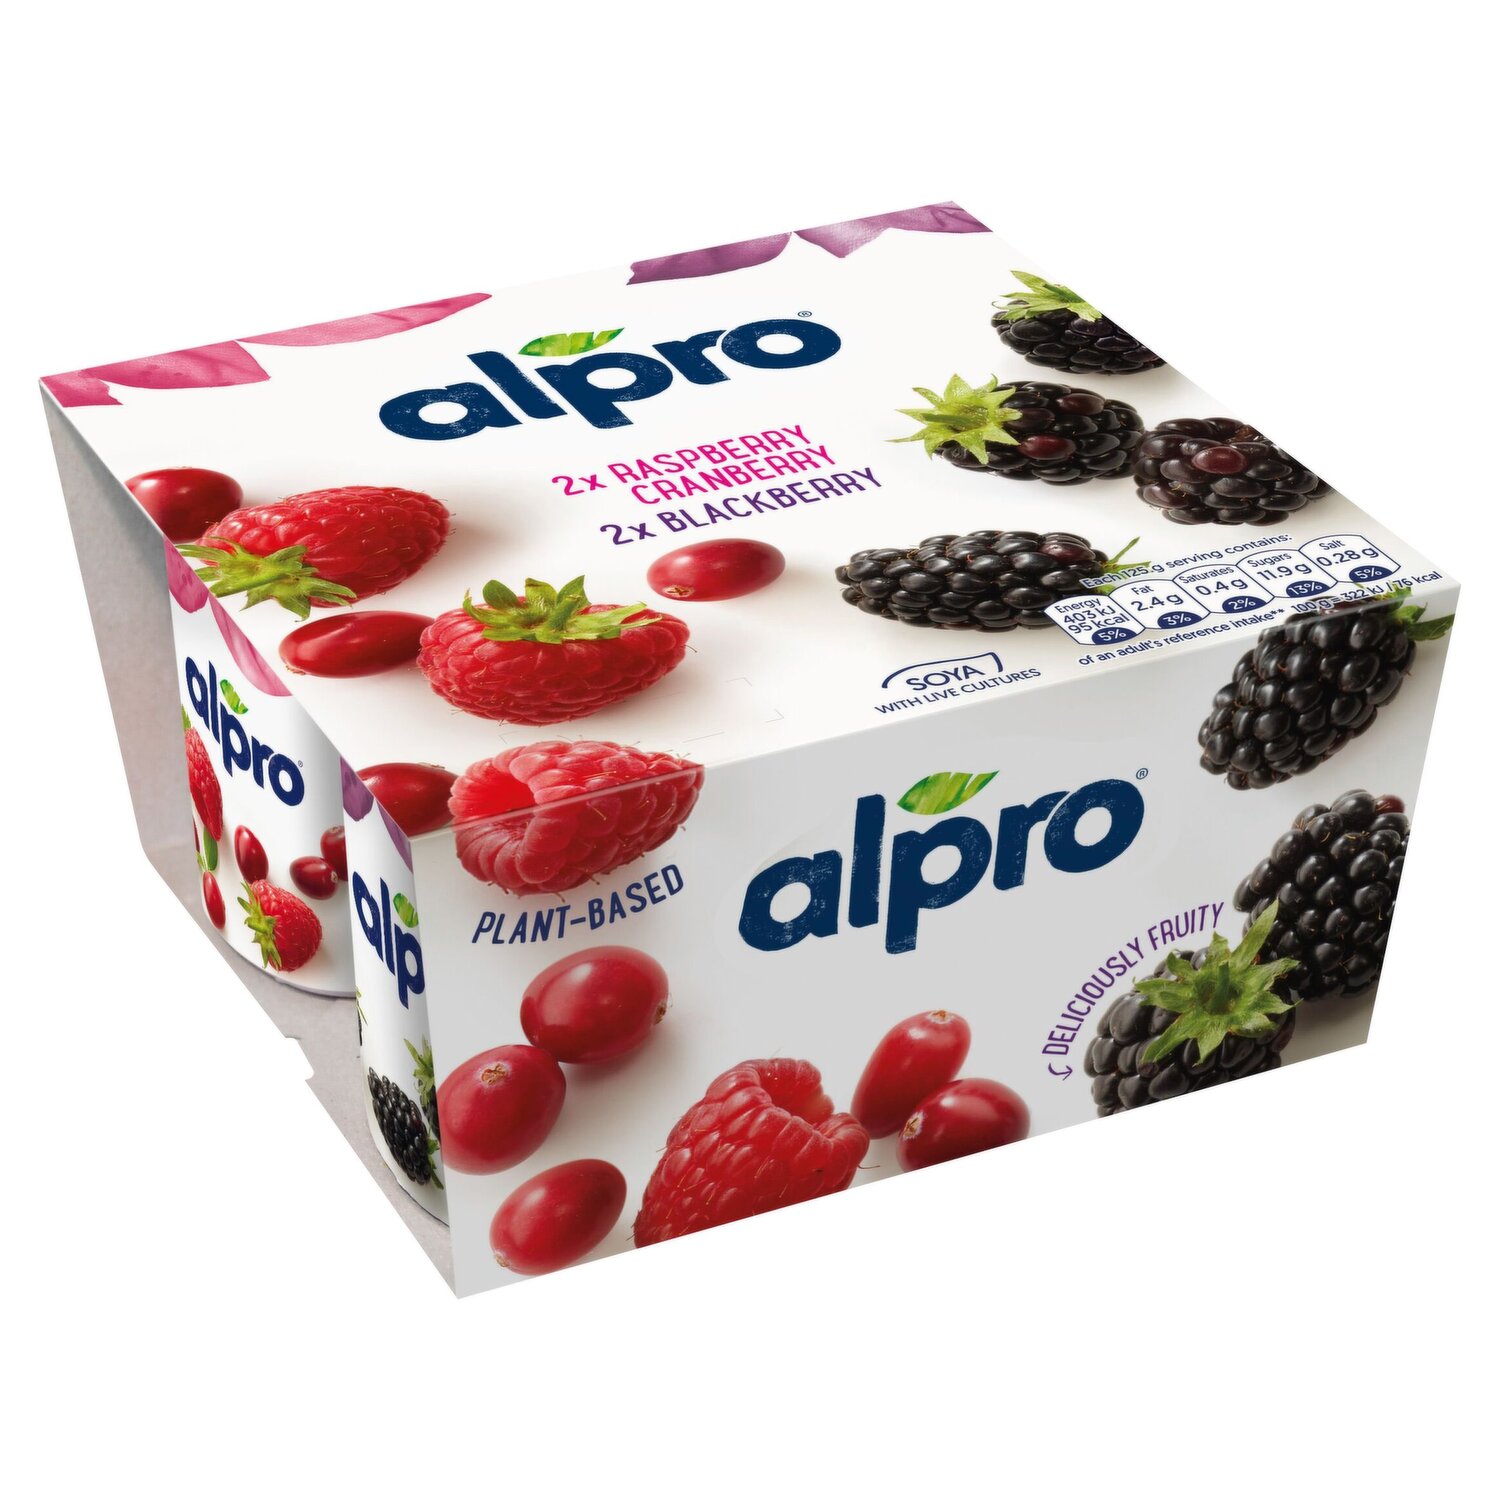 Alpro High Protein Strawberry and Raspberry - Dike & Son